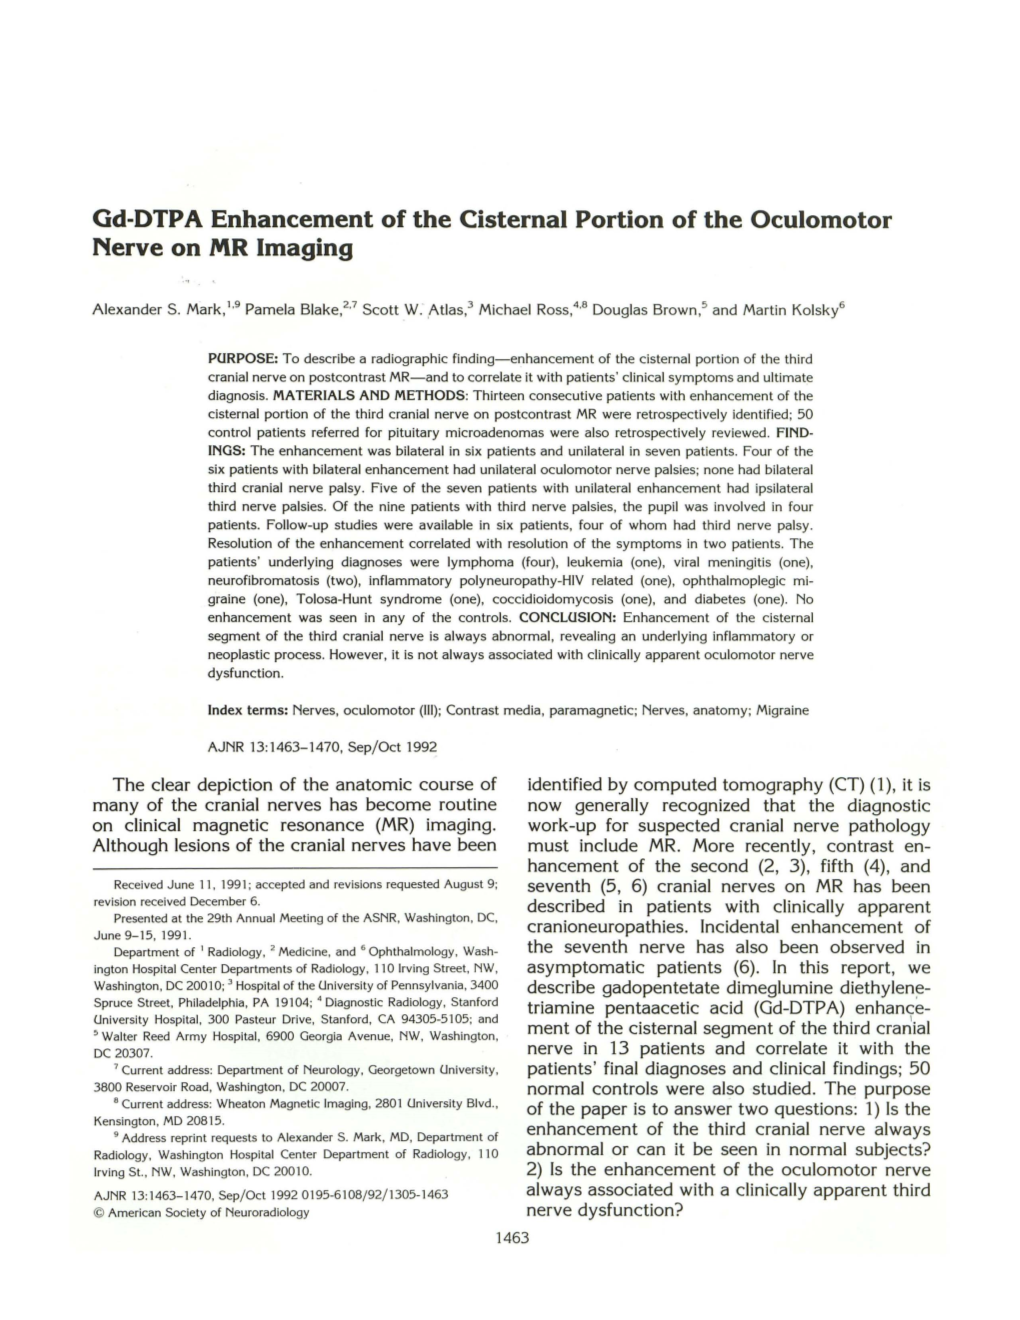 Gd-DTPA Enhancement of the Cisternal Portion of the Oculomotor Nerve on MR Imaging